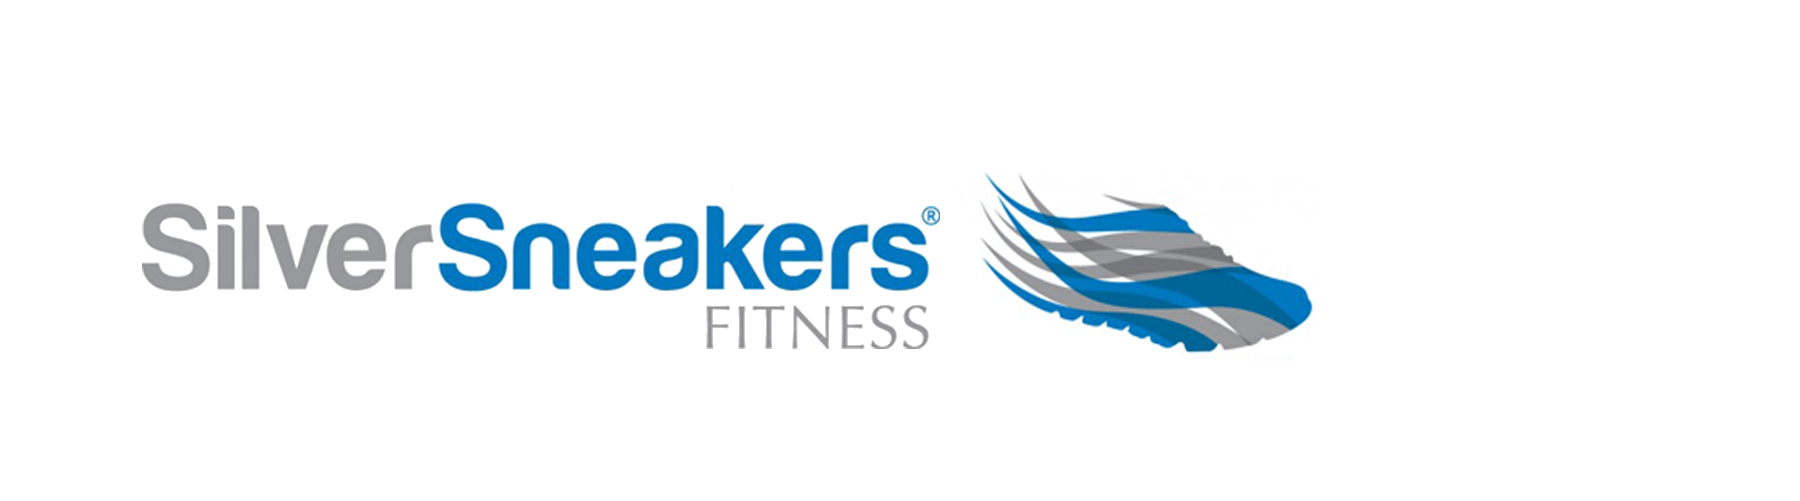 SilverSneakers Logo - Silver Sneakers Fitness Program in Tampa. JCC on the Cohn Campus